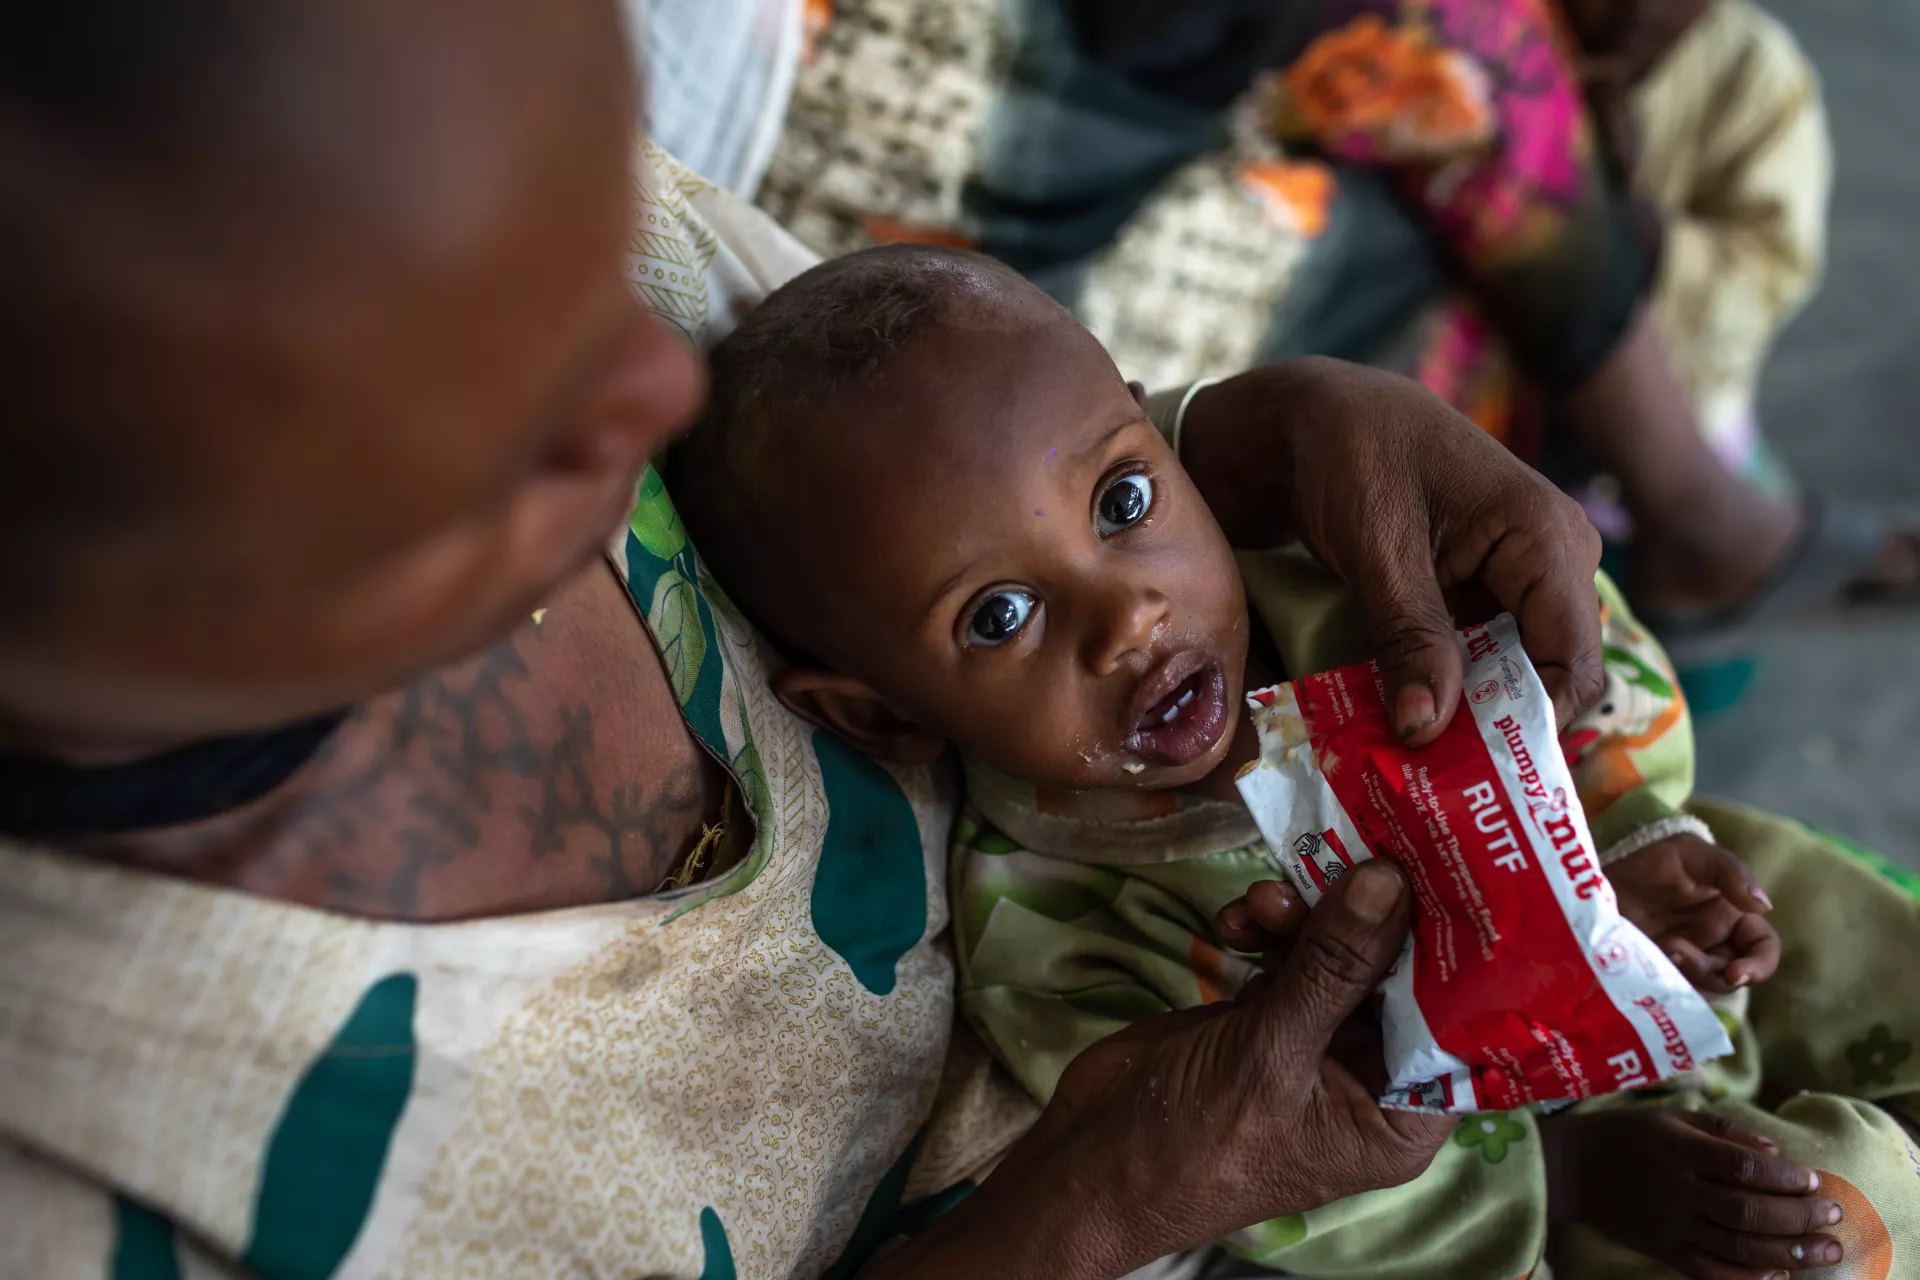 Letmedhin Eyasu holds her son Zewila Gebru, 1 year old, who is suffering from malnutrition at Agbe Health Center in the Tigray region of northern Ethiopia, on Monday, June 7, 2021. Zewila was provided with 2 weeks supply of RUTF.